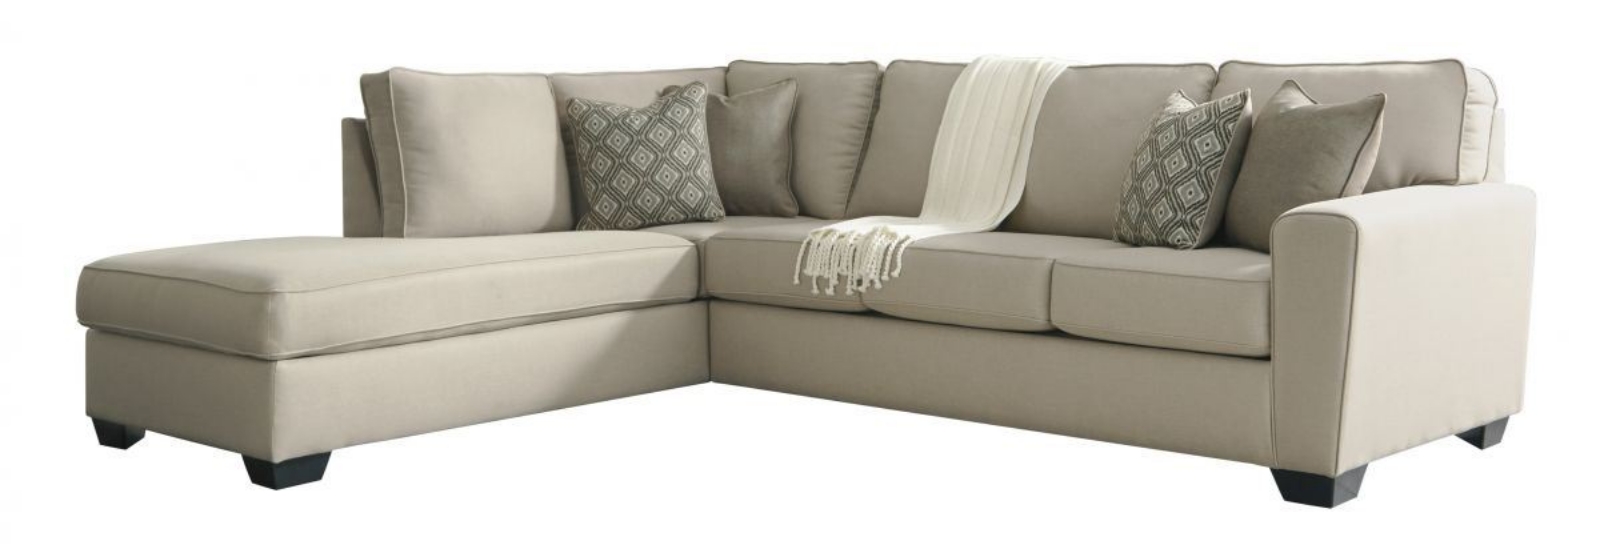 Picture of Calicho Sectional